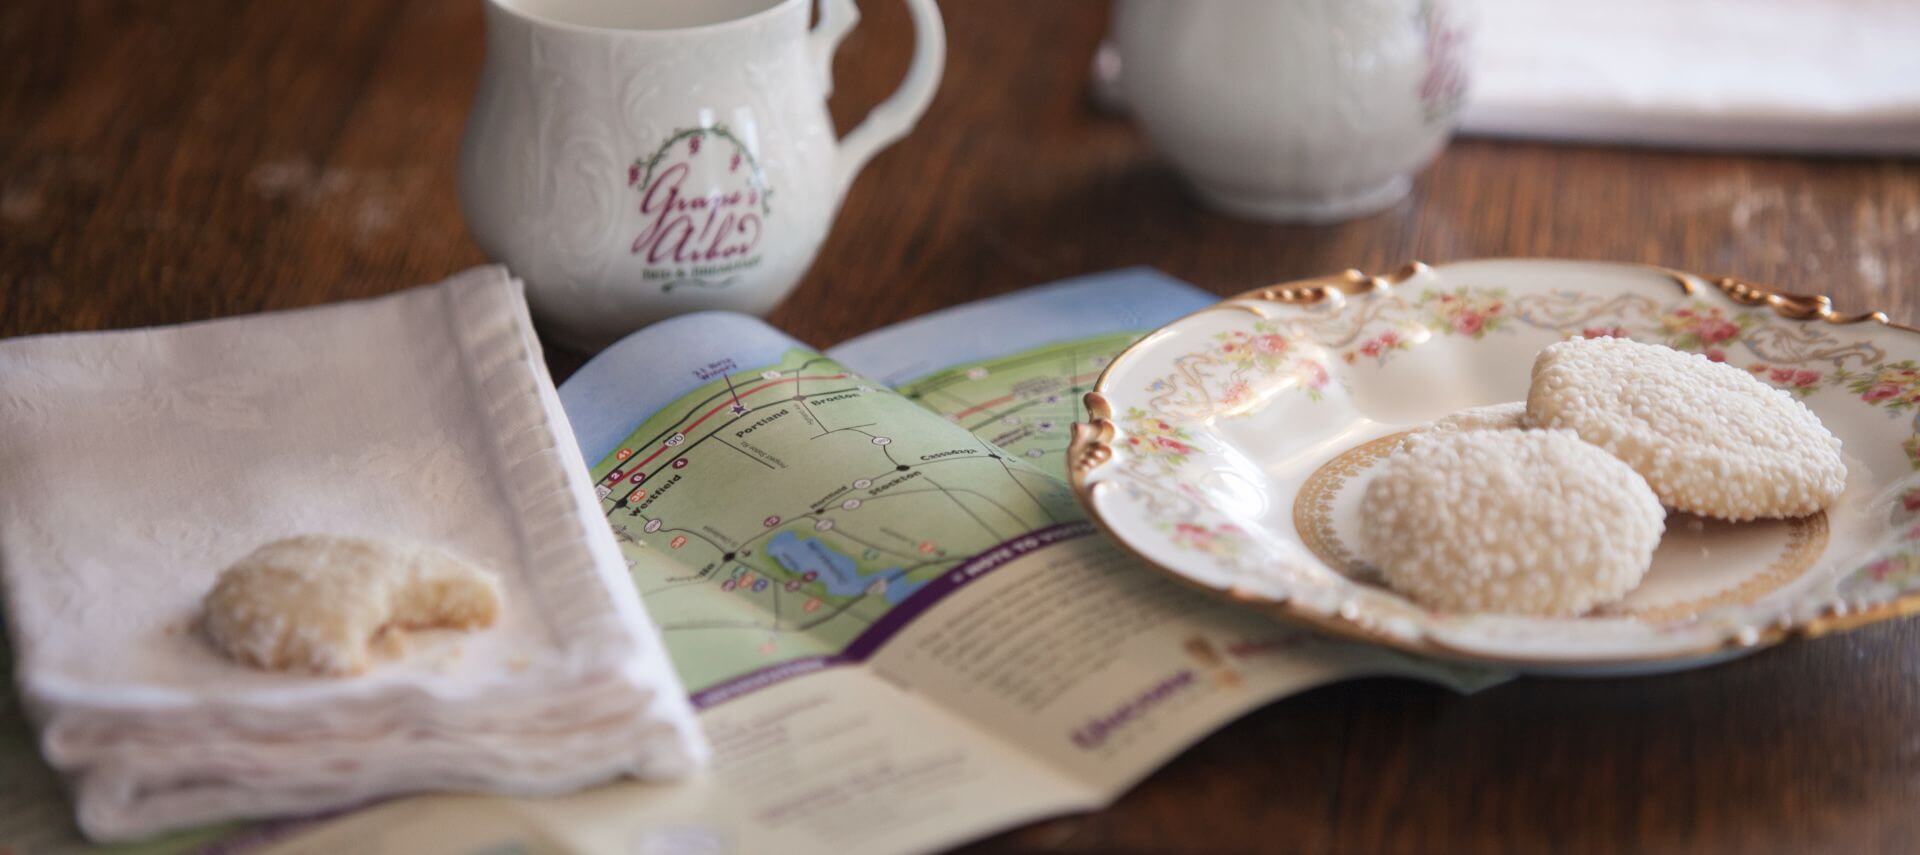 Cookies on a china plate with a map and two cups of coffee